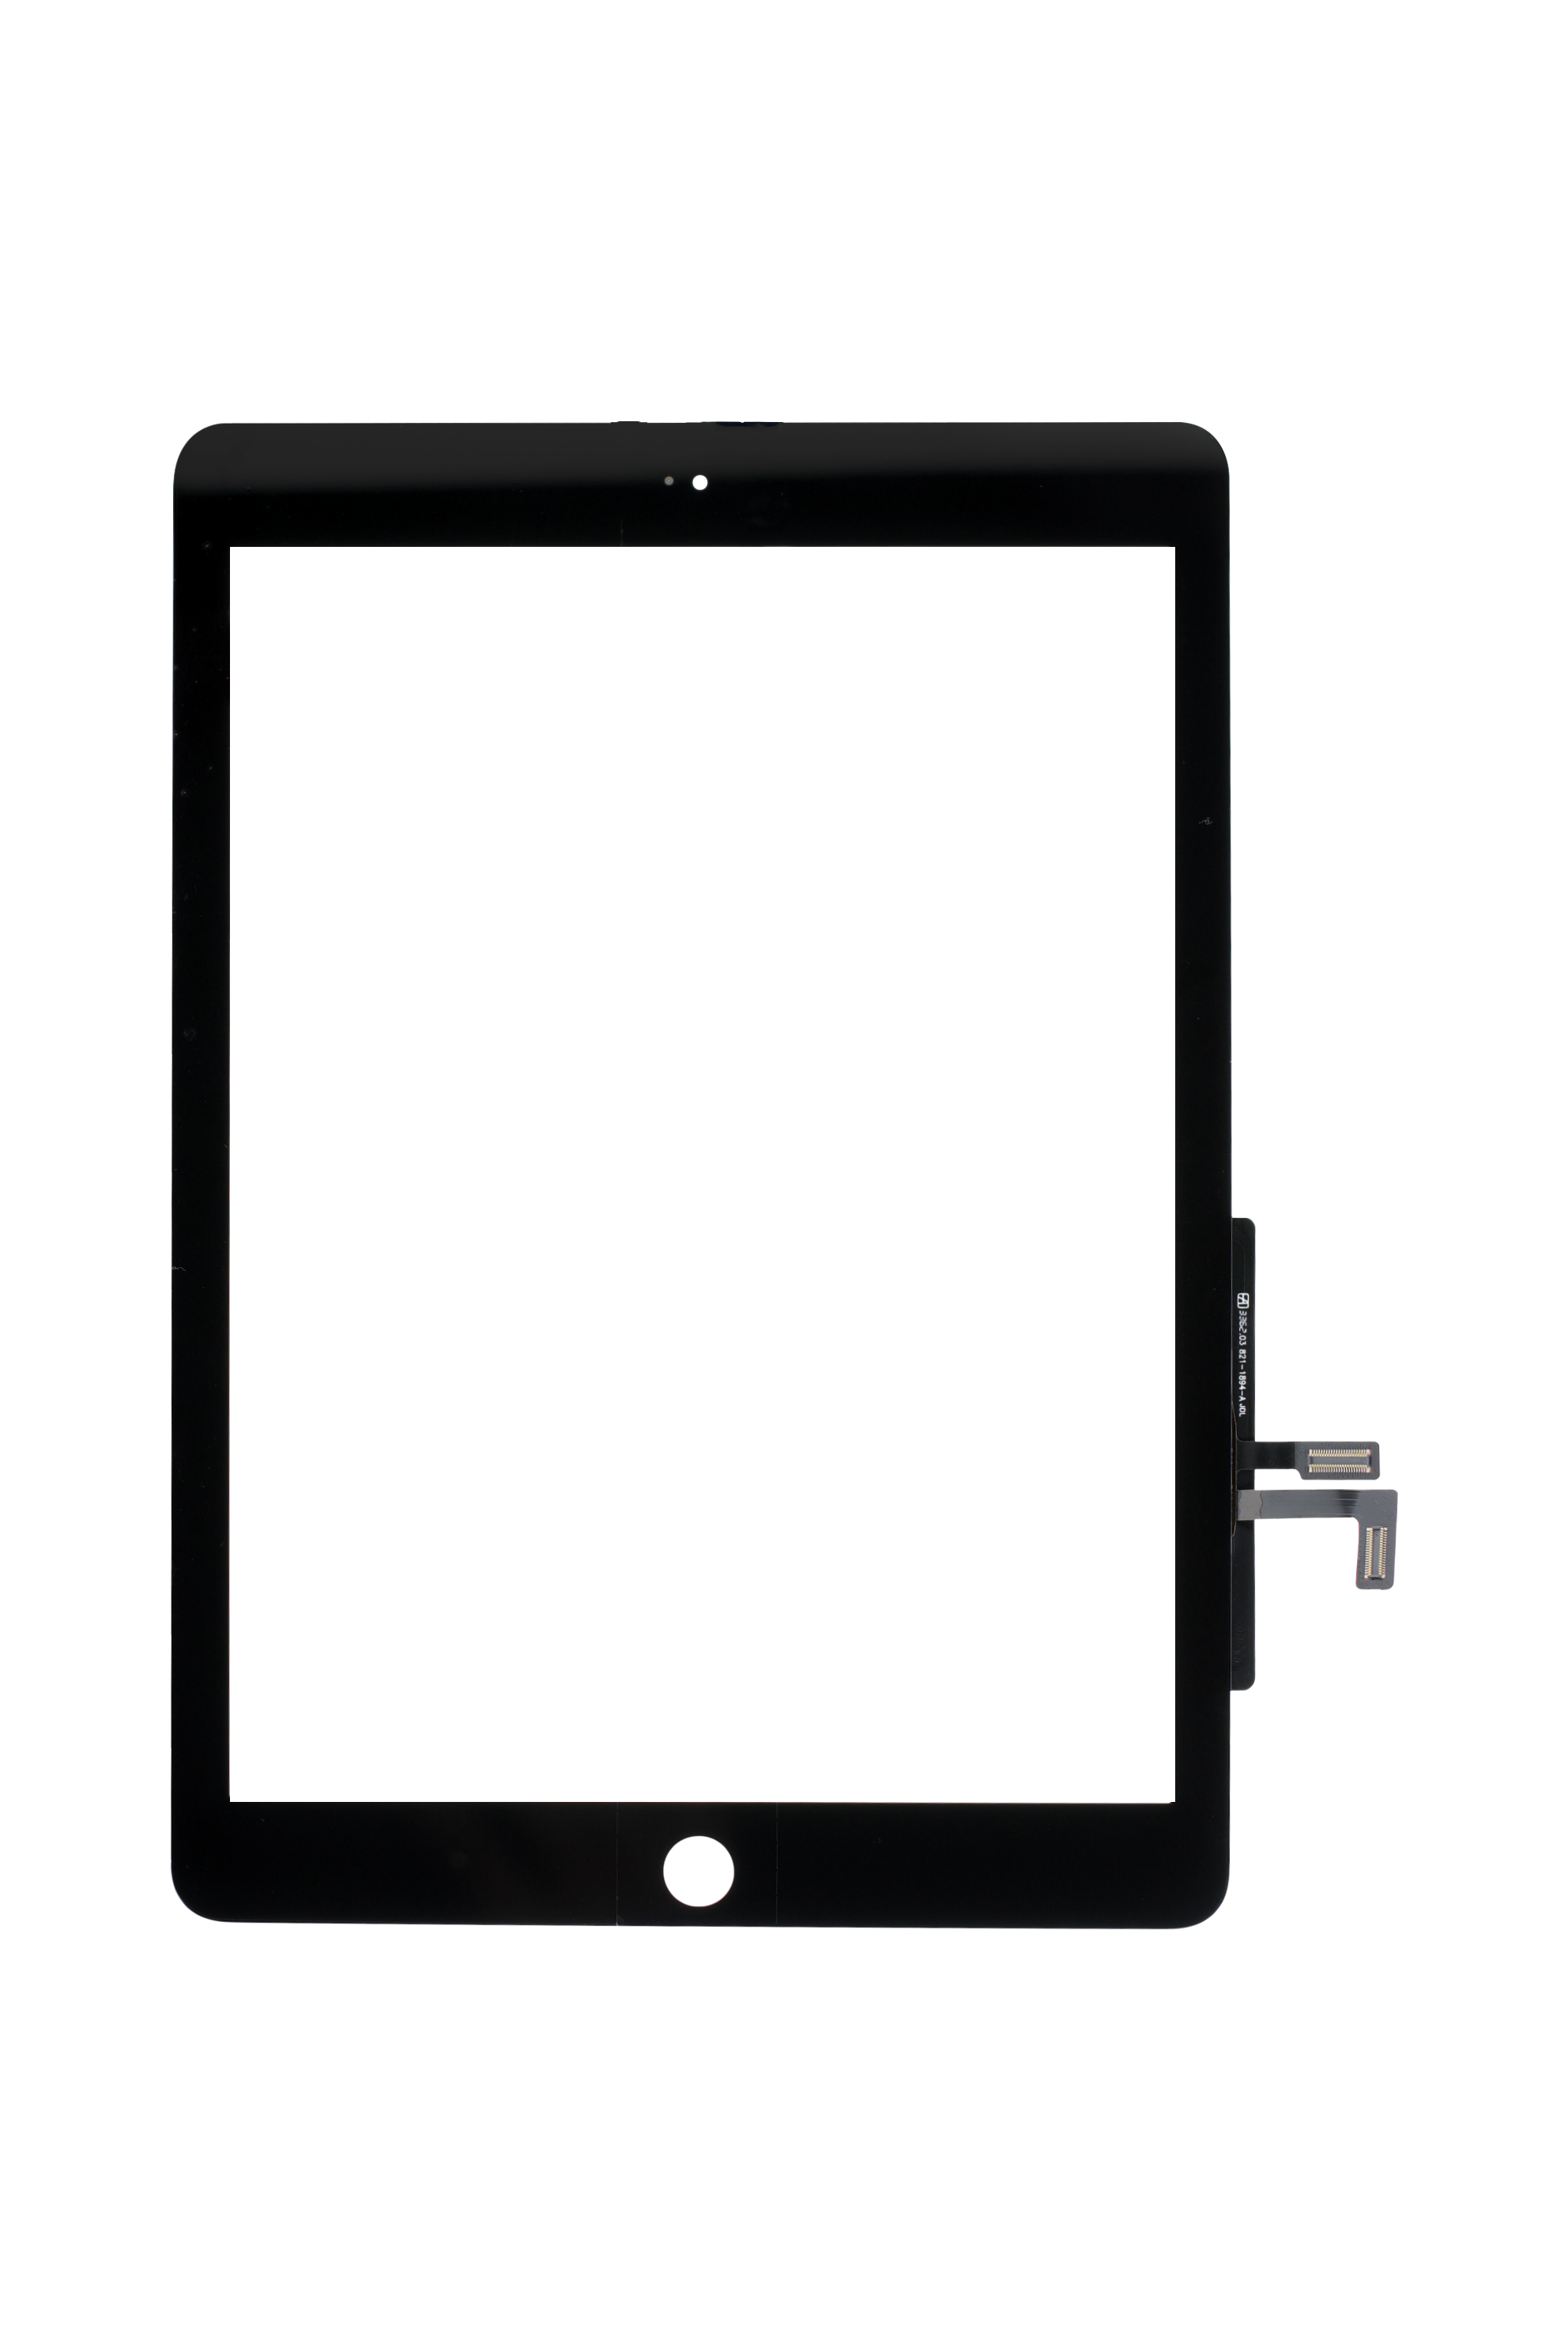 iPad mini 5 LCD & Digitizer Assembly Replacement Black